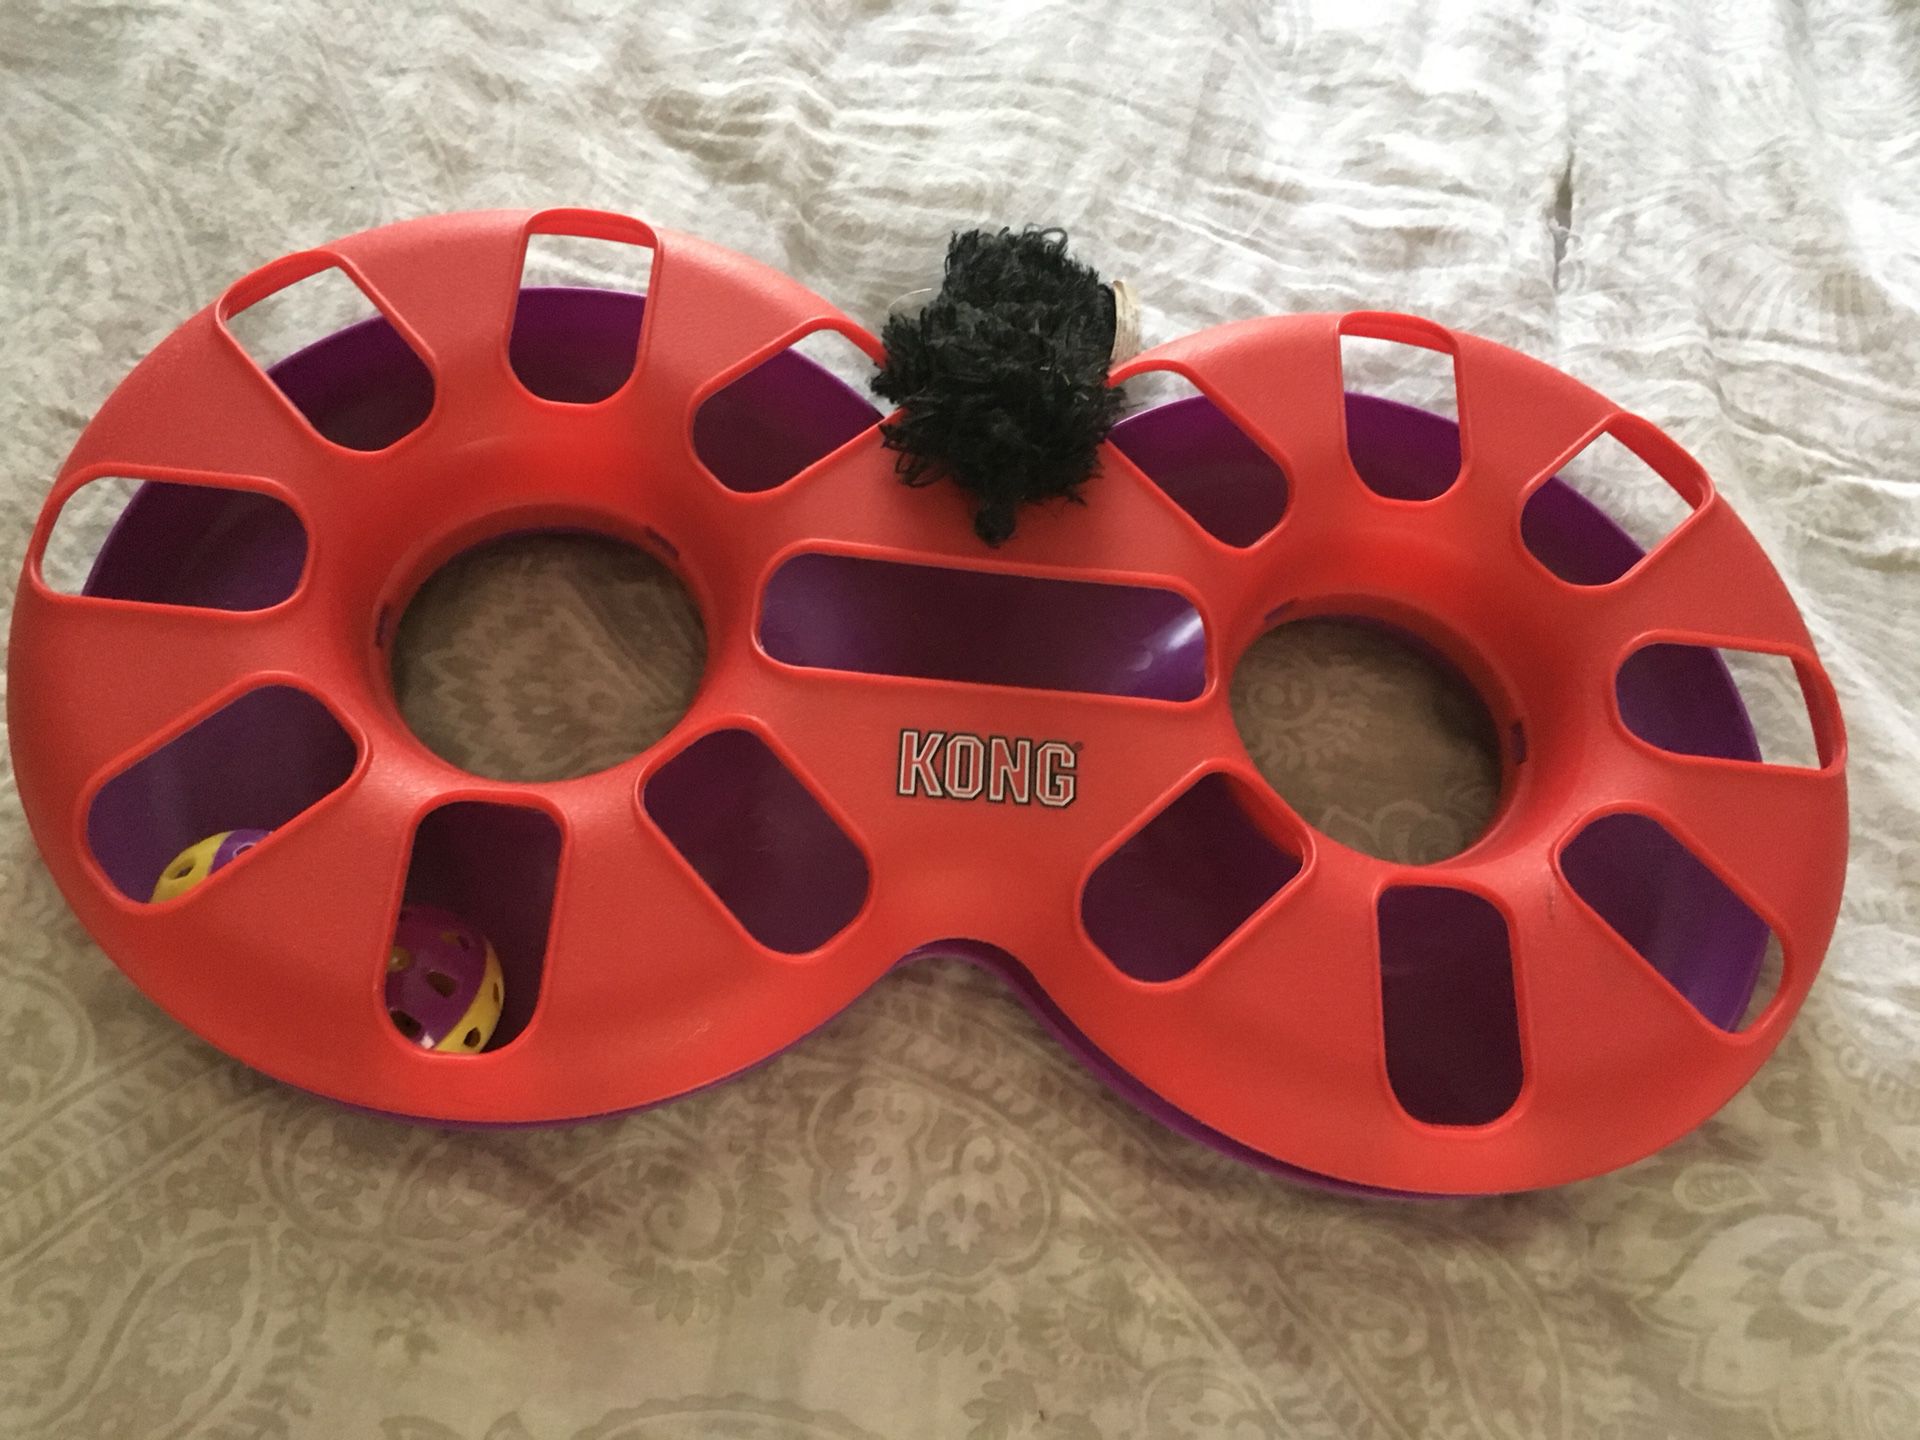 Kong Cat toy